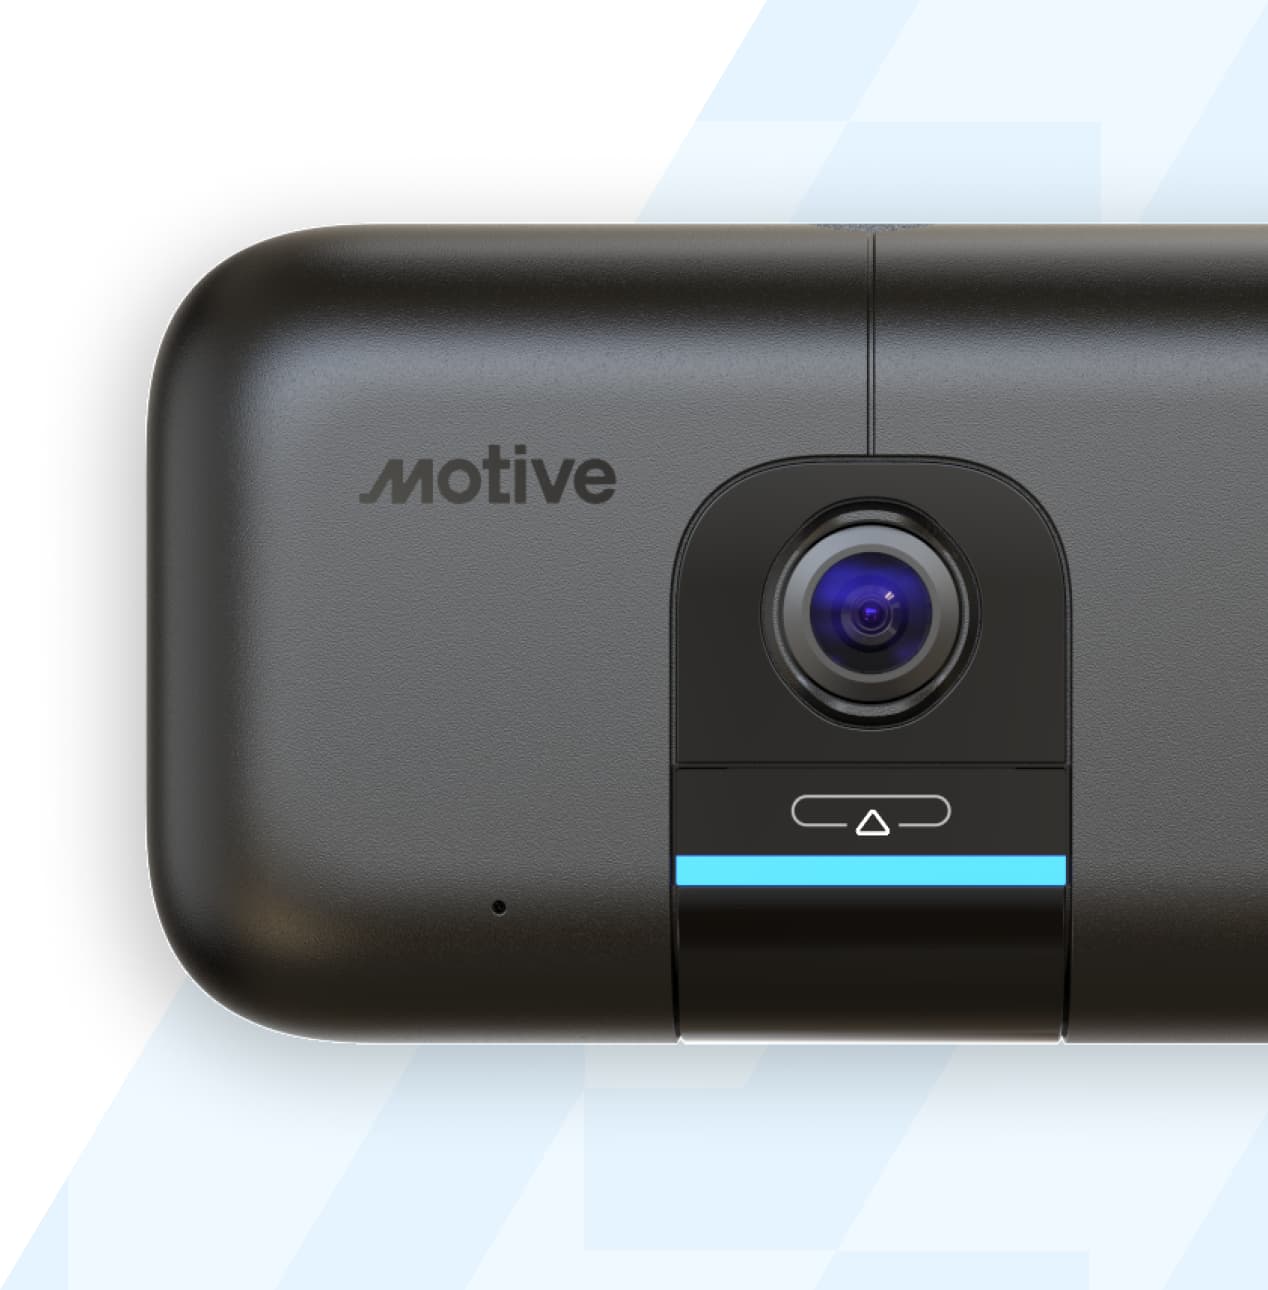 Experts agree, Motive is the most accurate, fastest AI dash cam.